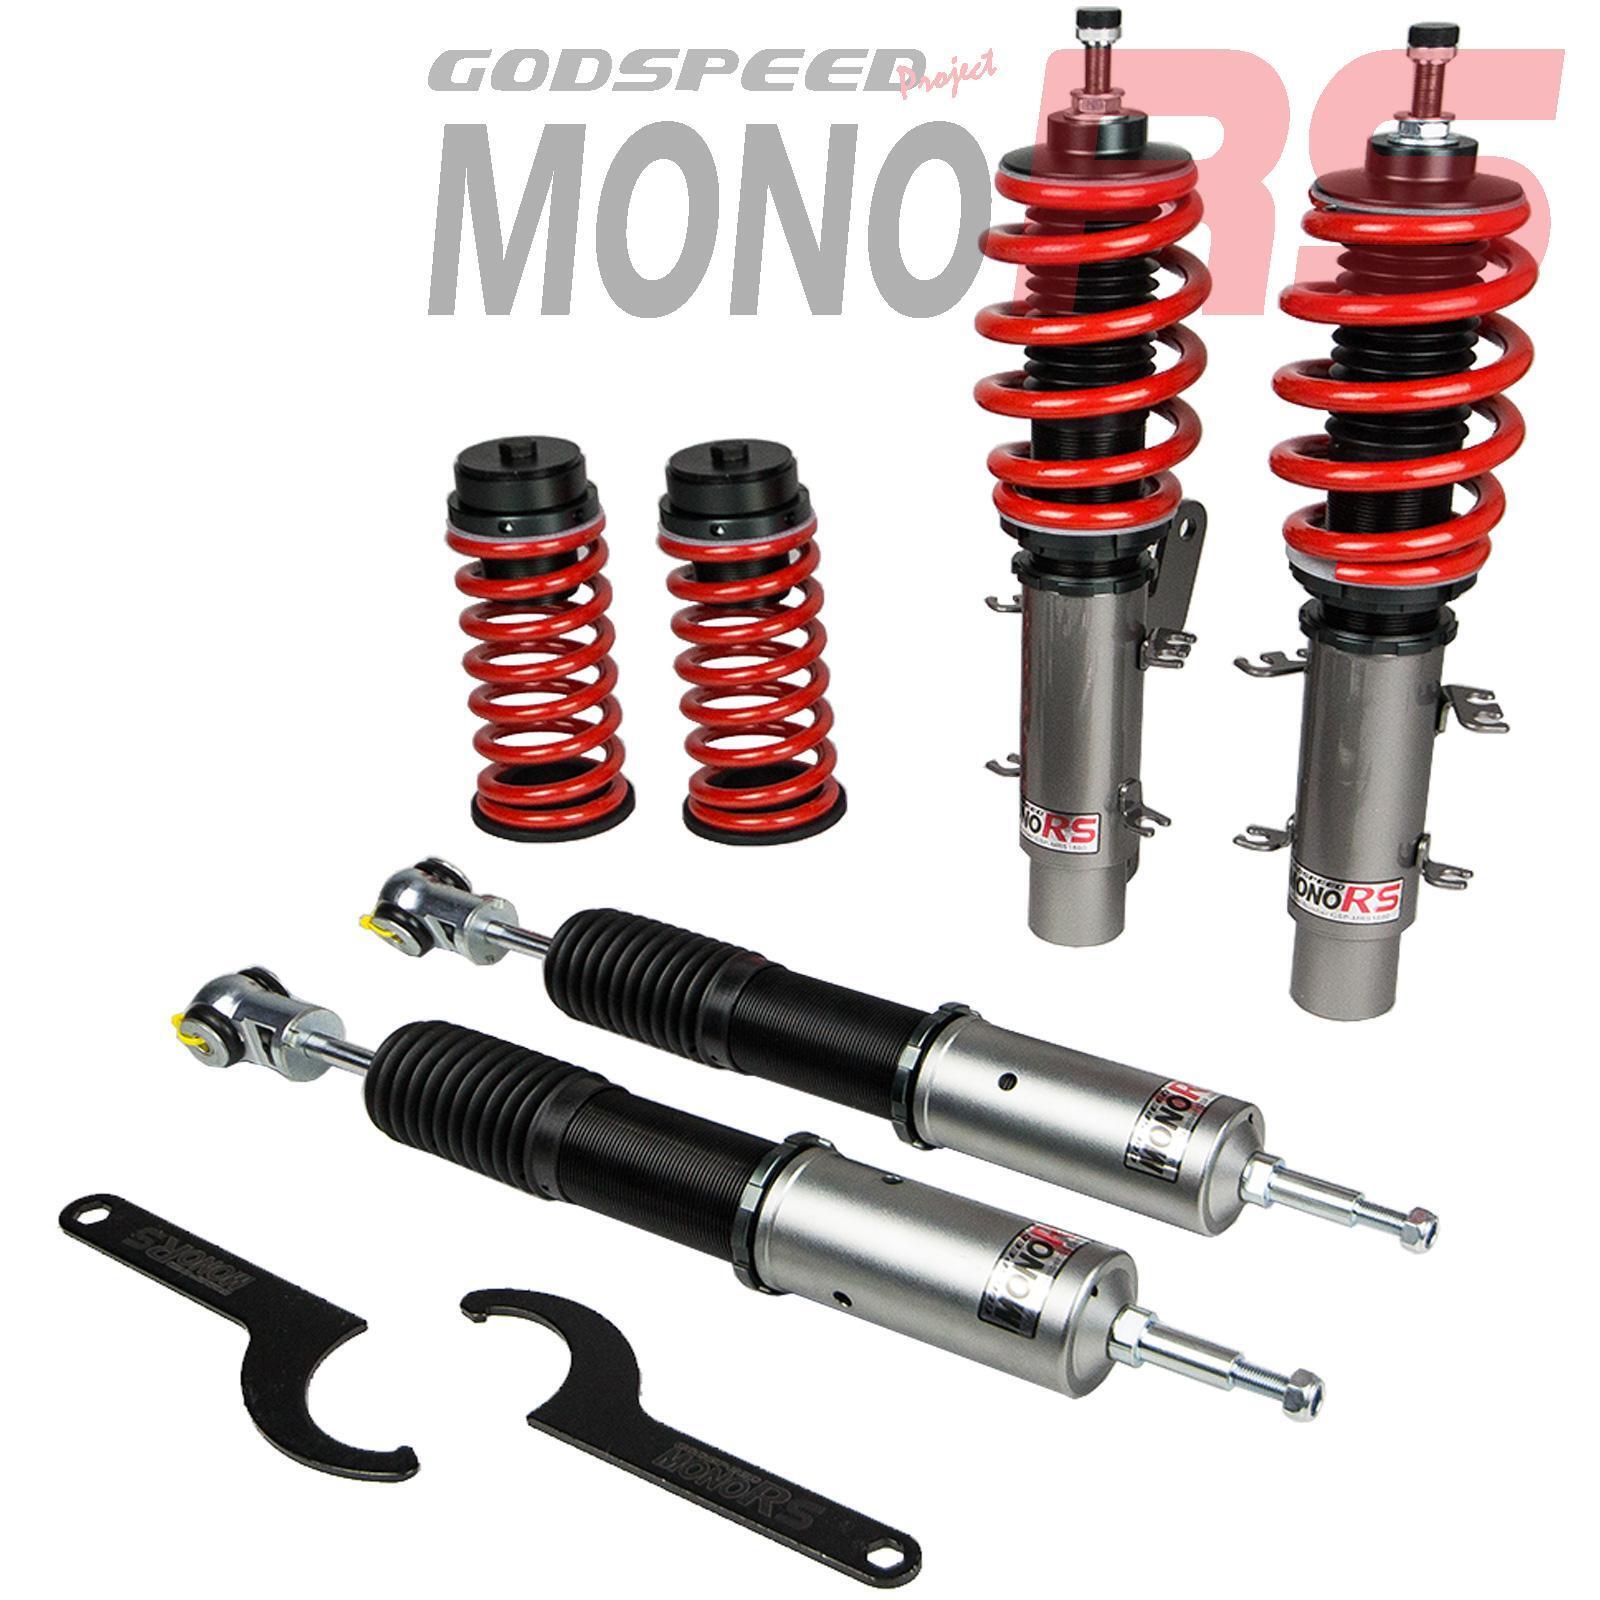 Godspeed MonoRS Coilovers Lowering Kit for VW GOLF MK4 99-05 Adjustable